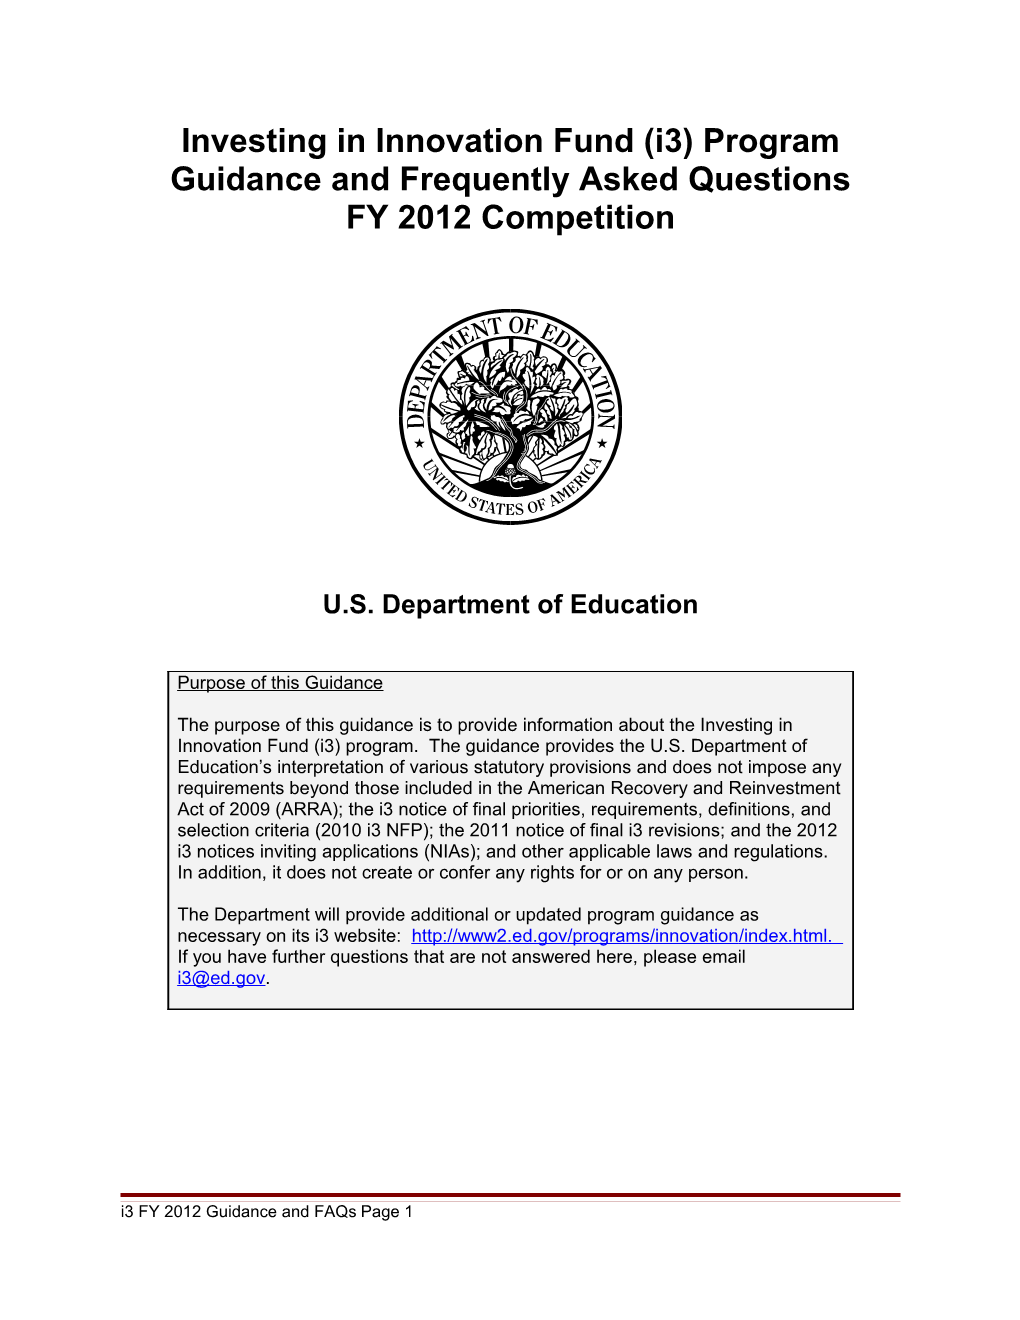 FY 2011 Investing in Innovation Fund (I3) Program Guidance and Frequently Asked Questions